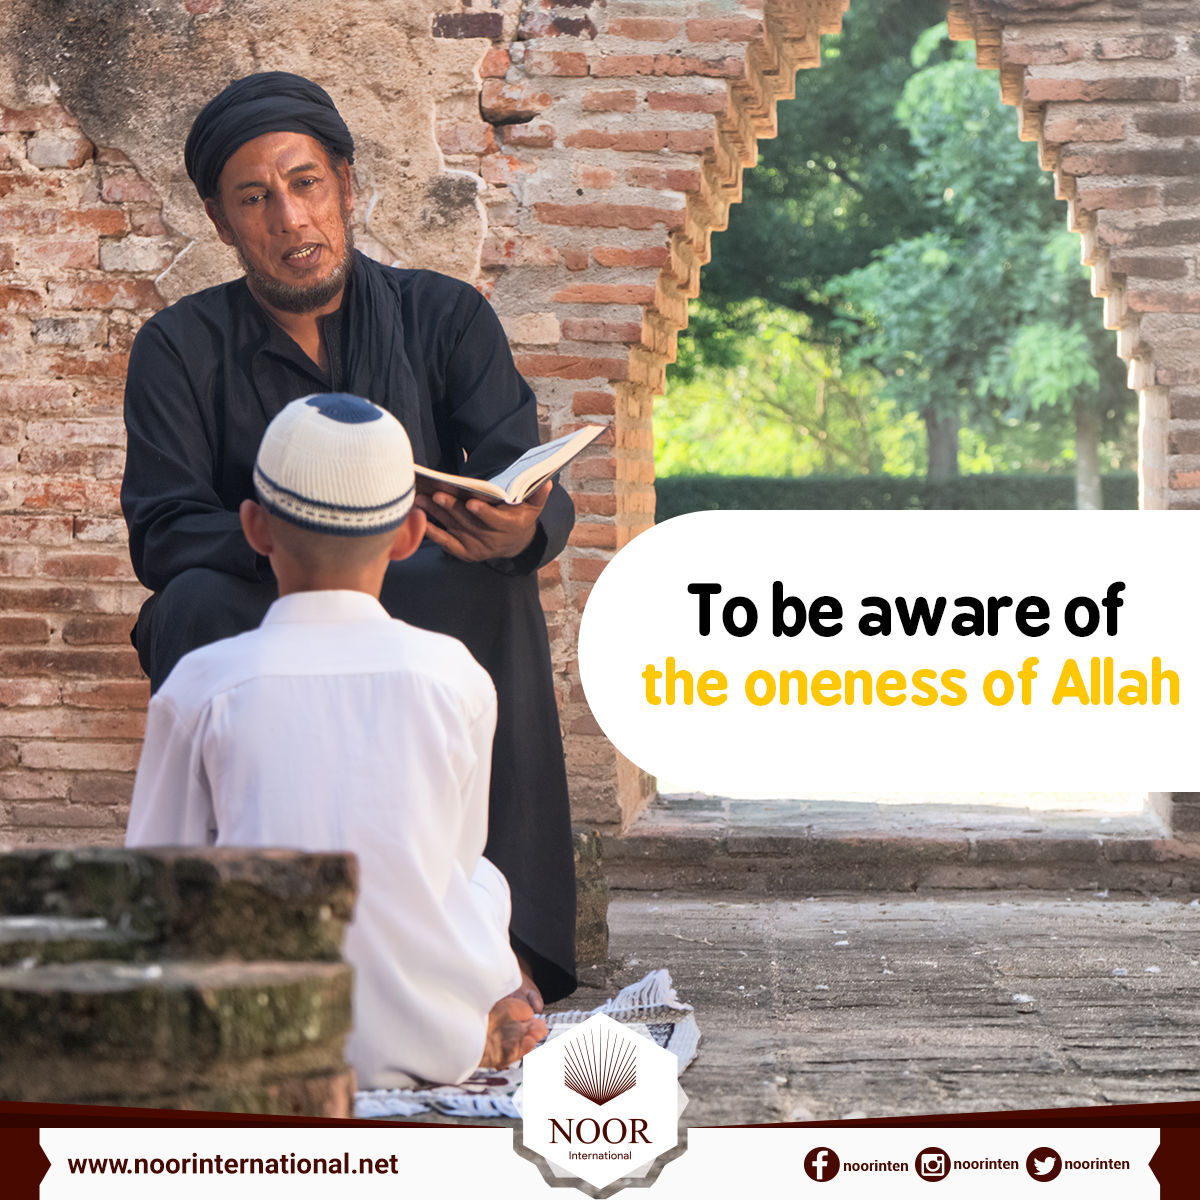 To be aware of the oneness of Allah